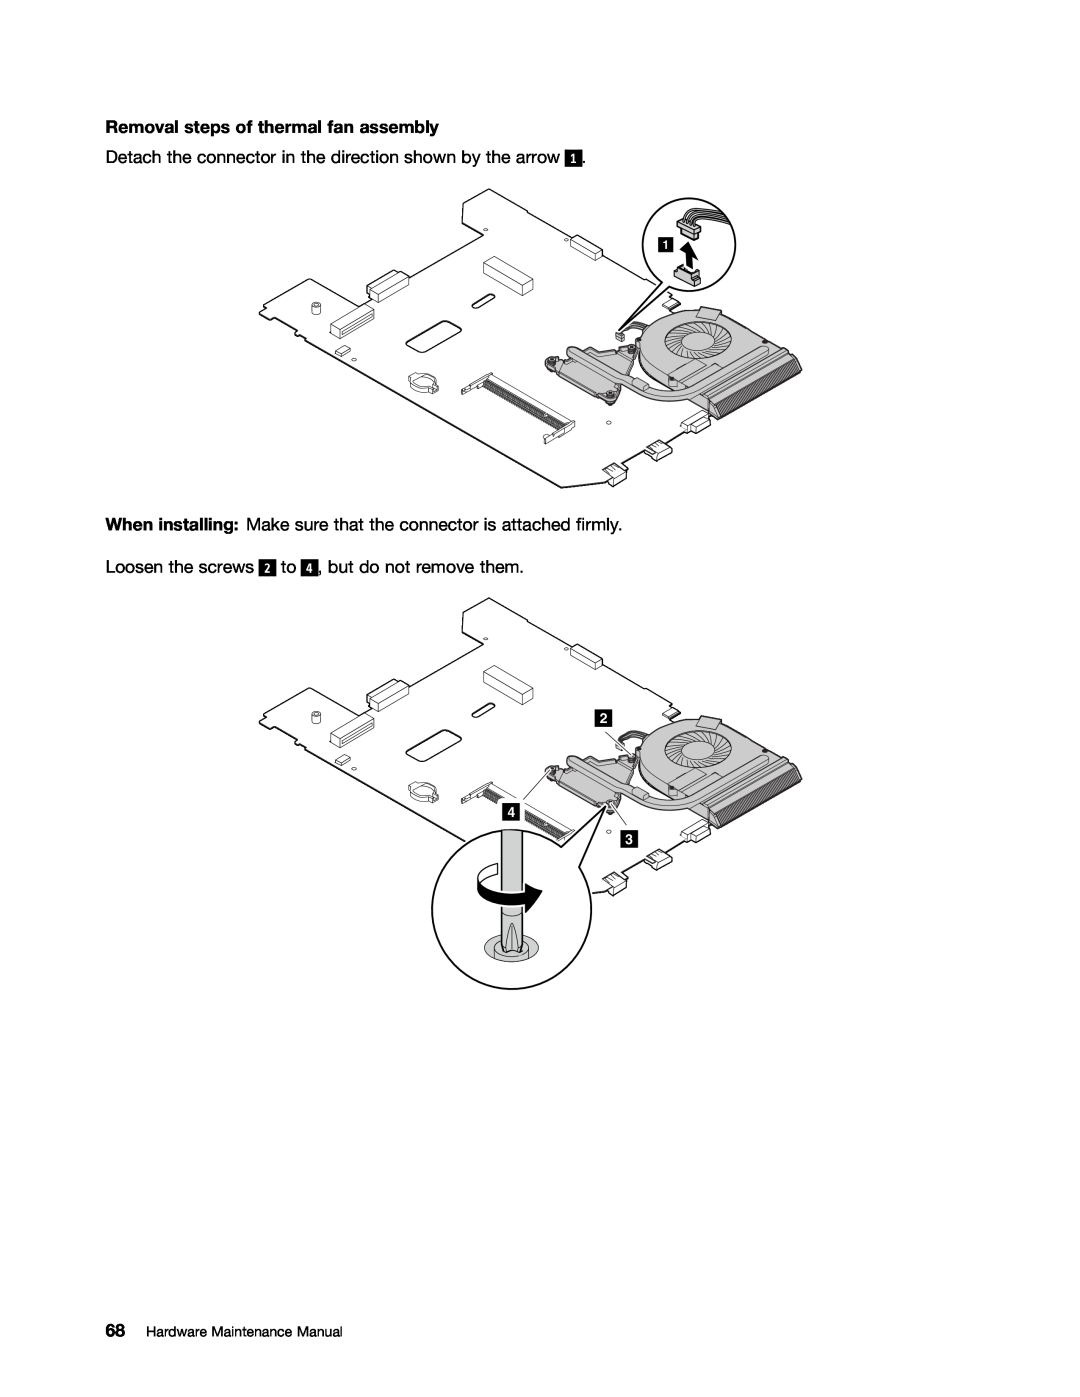 Lenovo B575E manual Removal steps of thermal fan assembly, Detach the connector in the direction shown by the arrow 